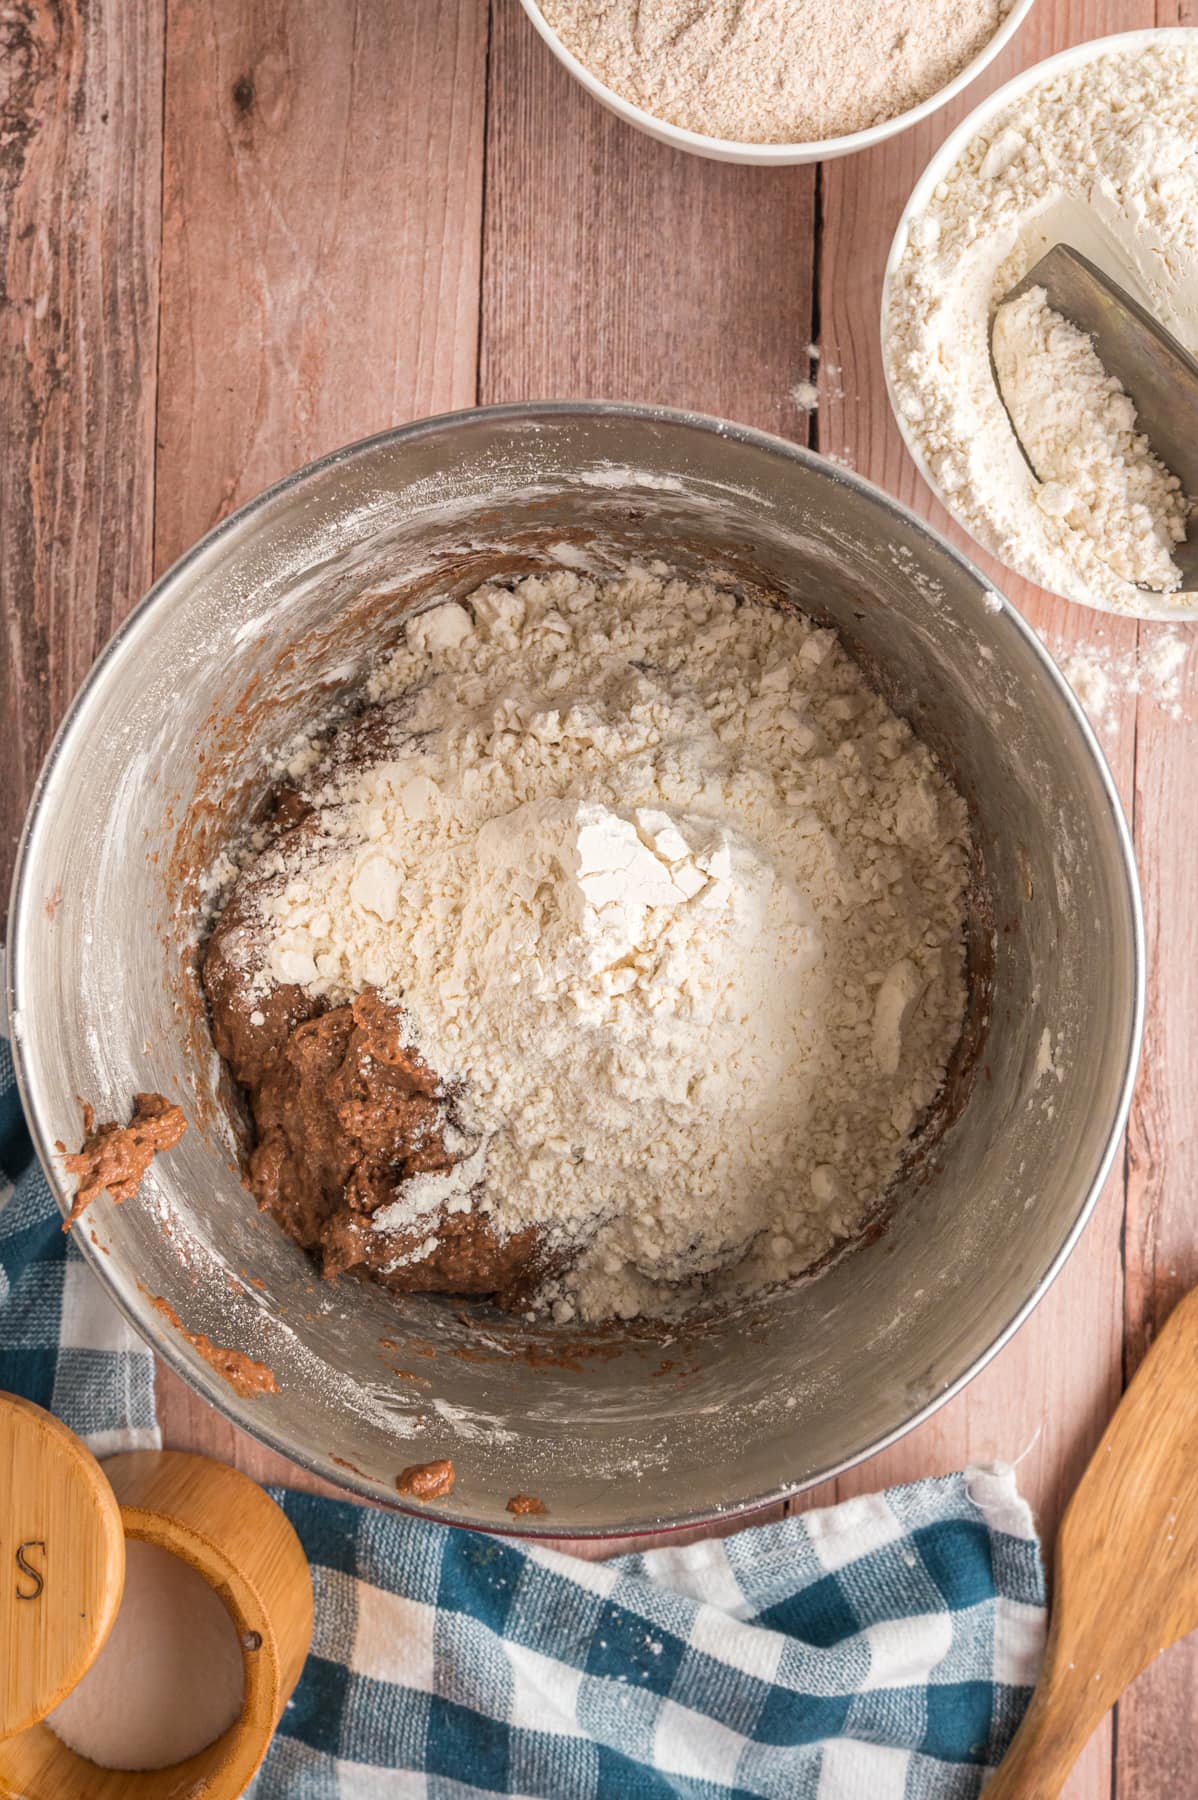 flour in mixing bowl with bread dough